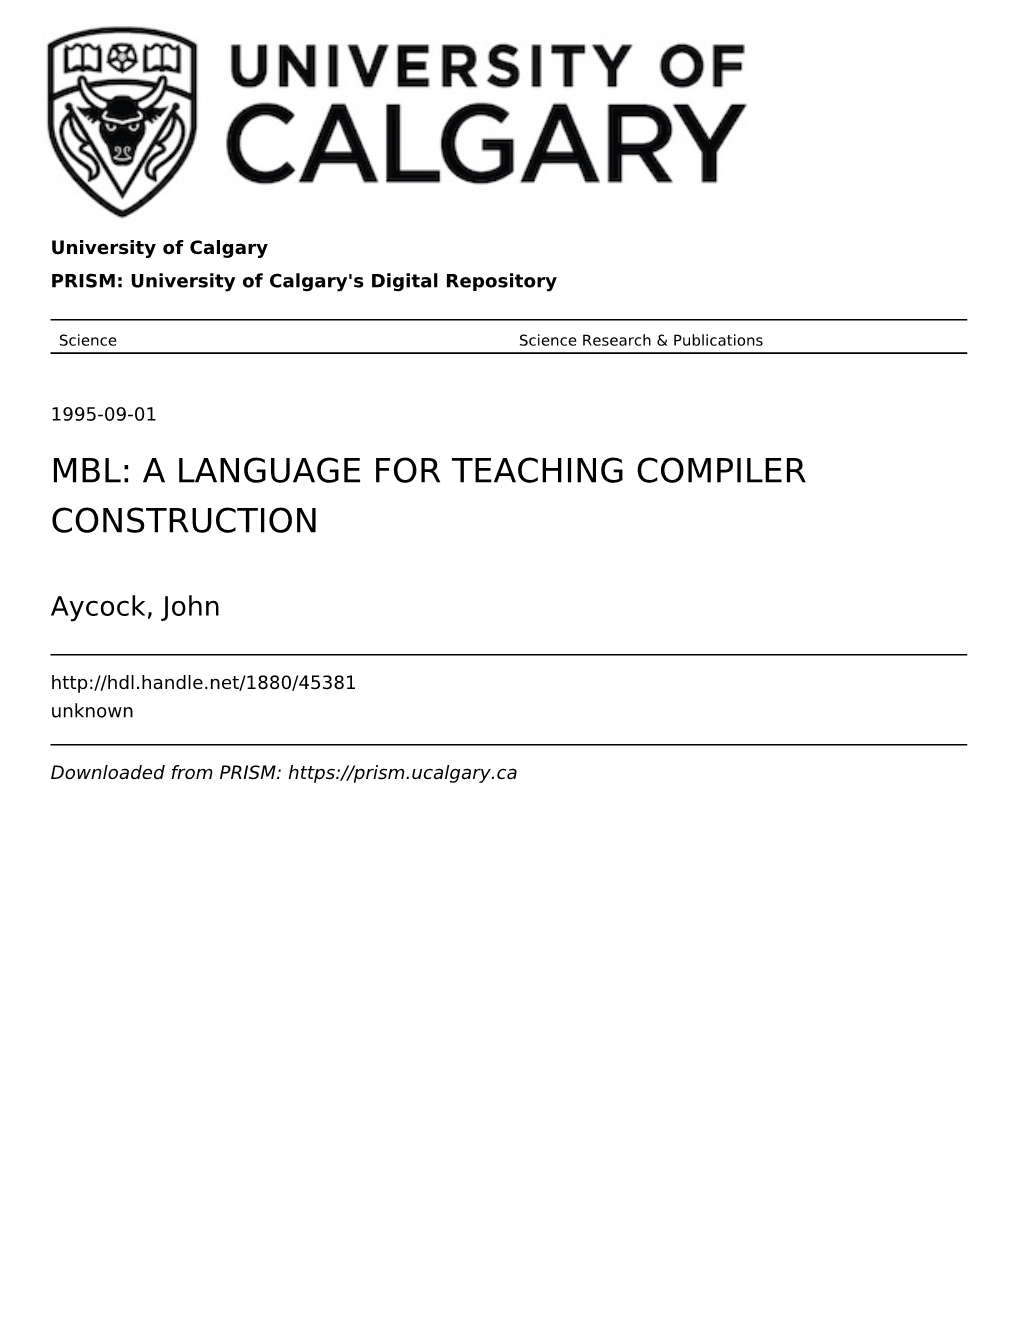 Mbl: a Language for Teaching Compiler Construction